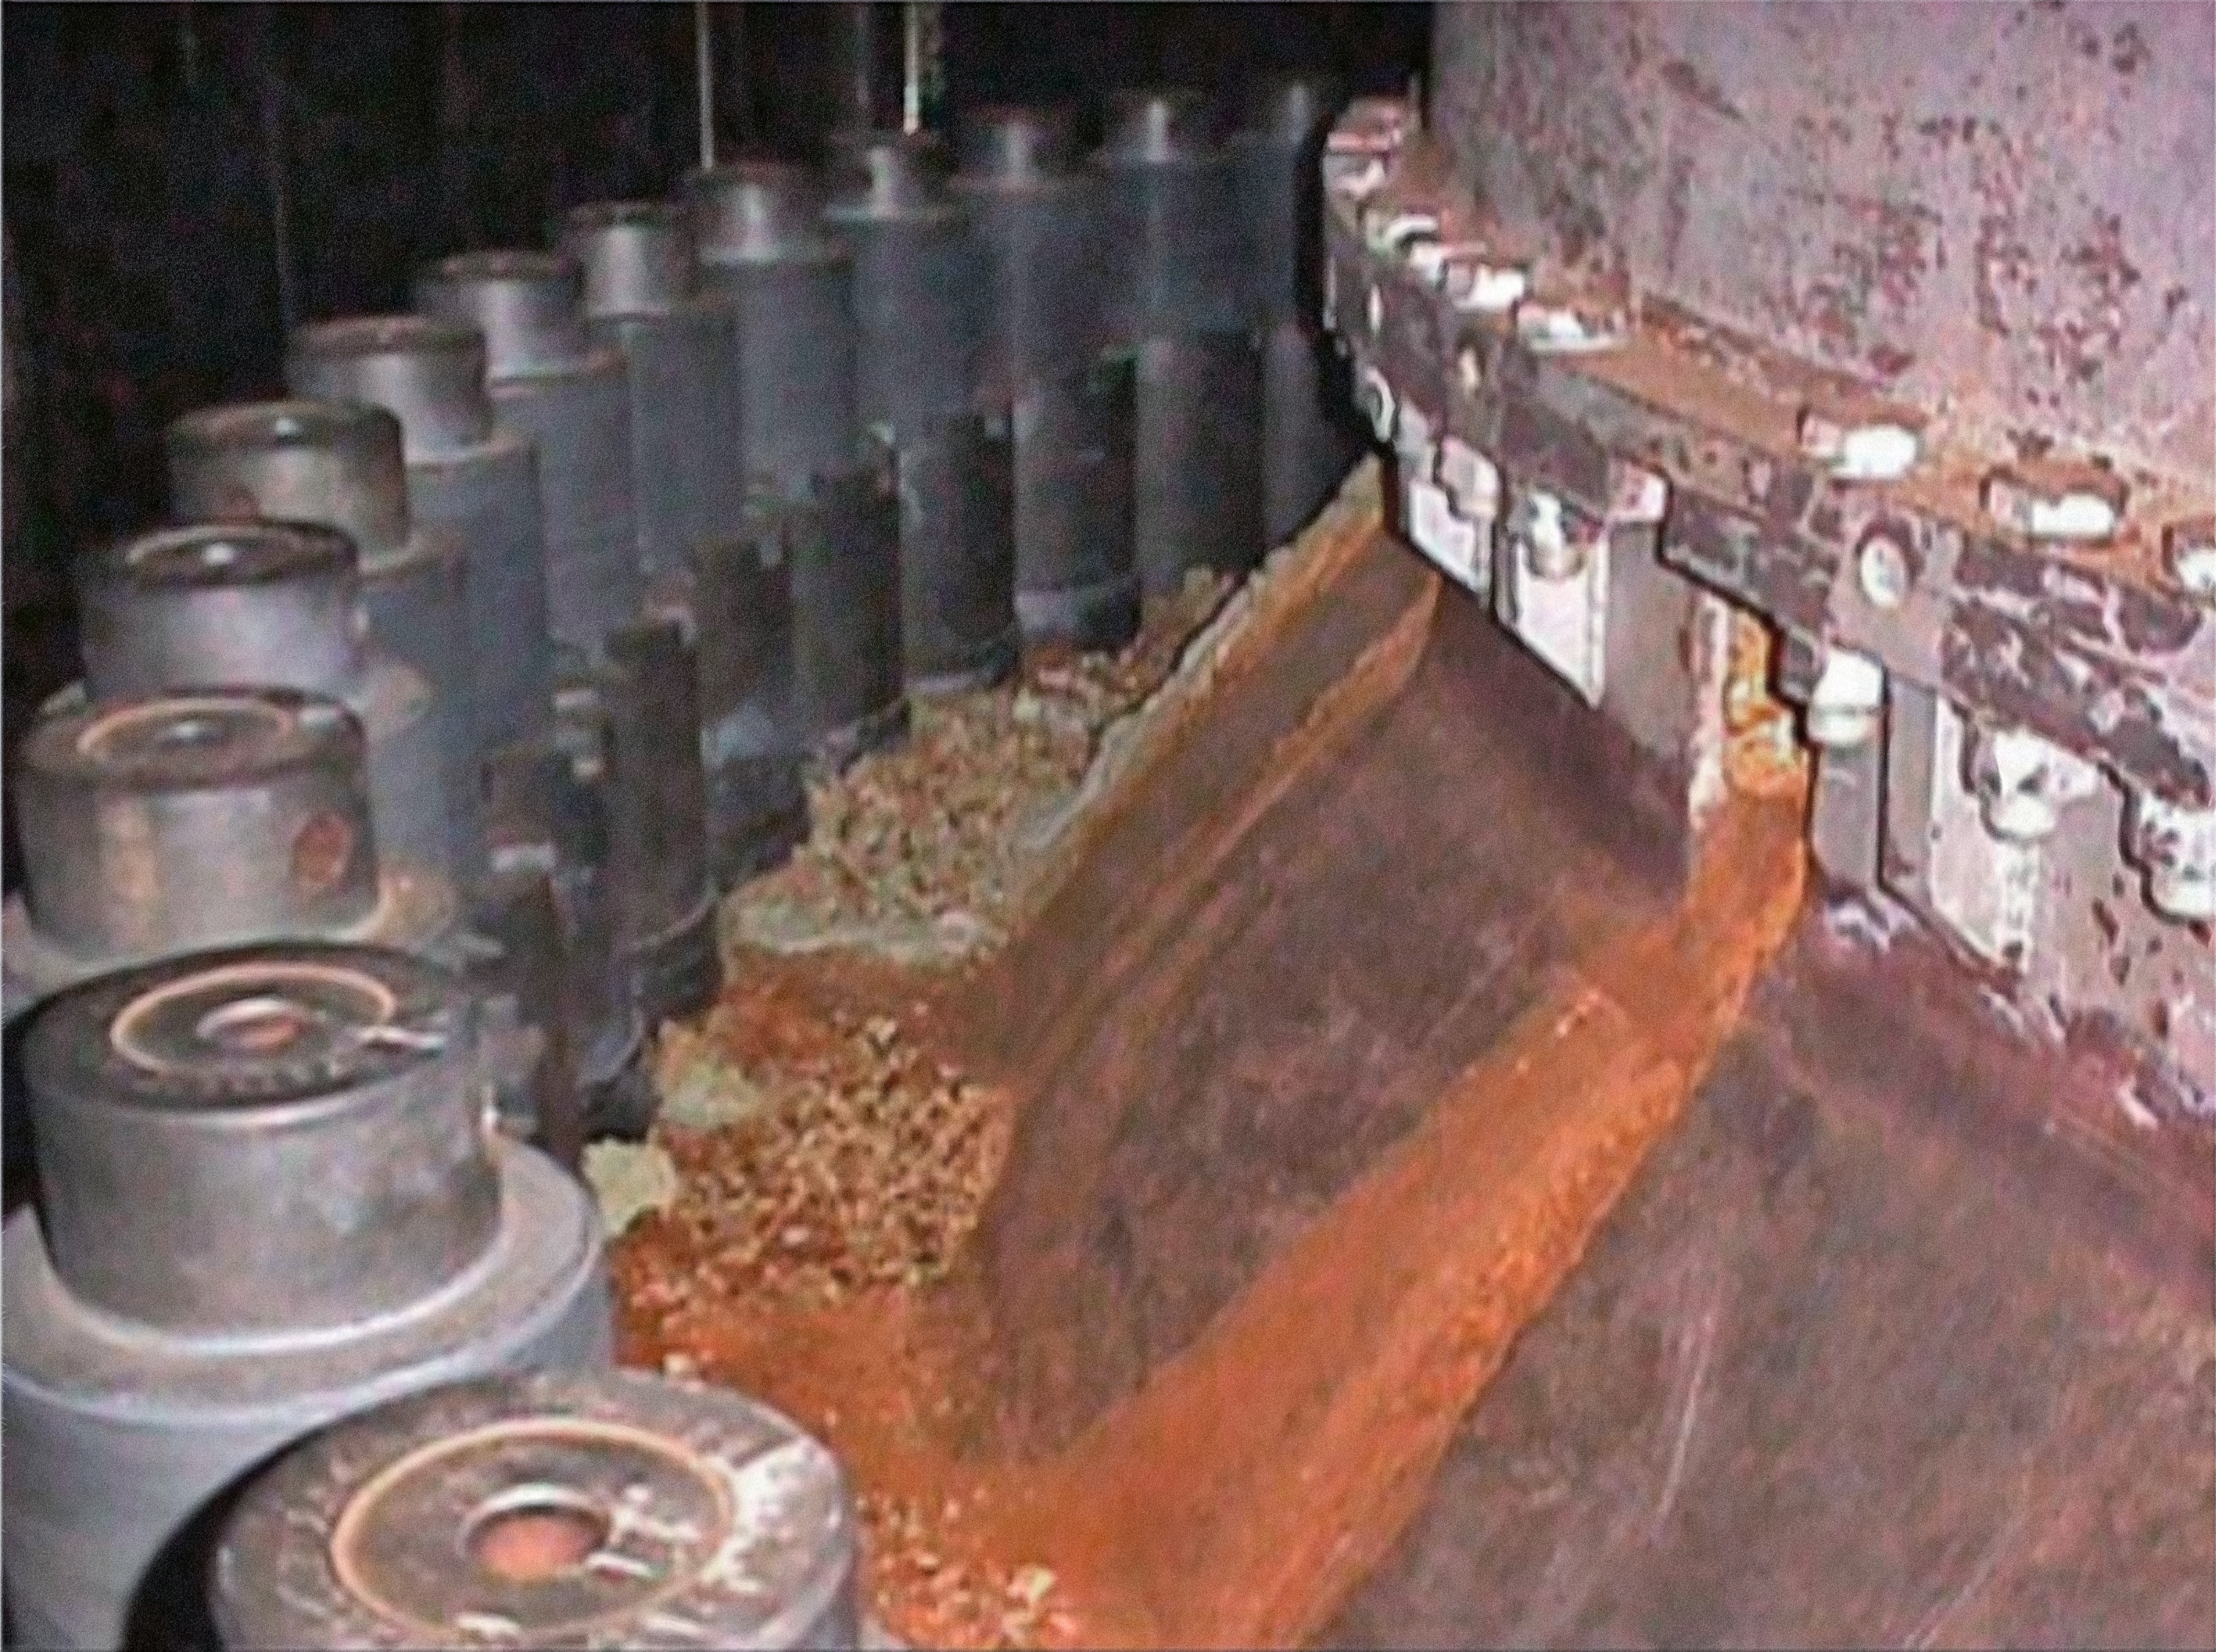 2)	The reactor pressure vessel at the Davis-Besse NPP shows a buildup of boric acid deposits from leaking nozzles (not shown, 2000). The plant later discovered the acid had corroded part of the pressure vessel head, triggering a two-year shut down to repair the damage, and multi-million dollar fines from the NRC. Source: NRC.